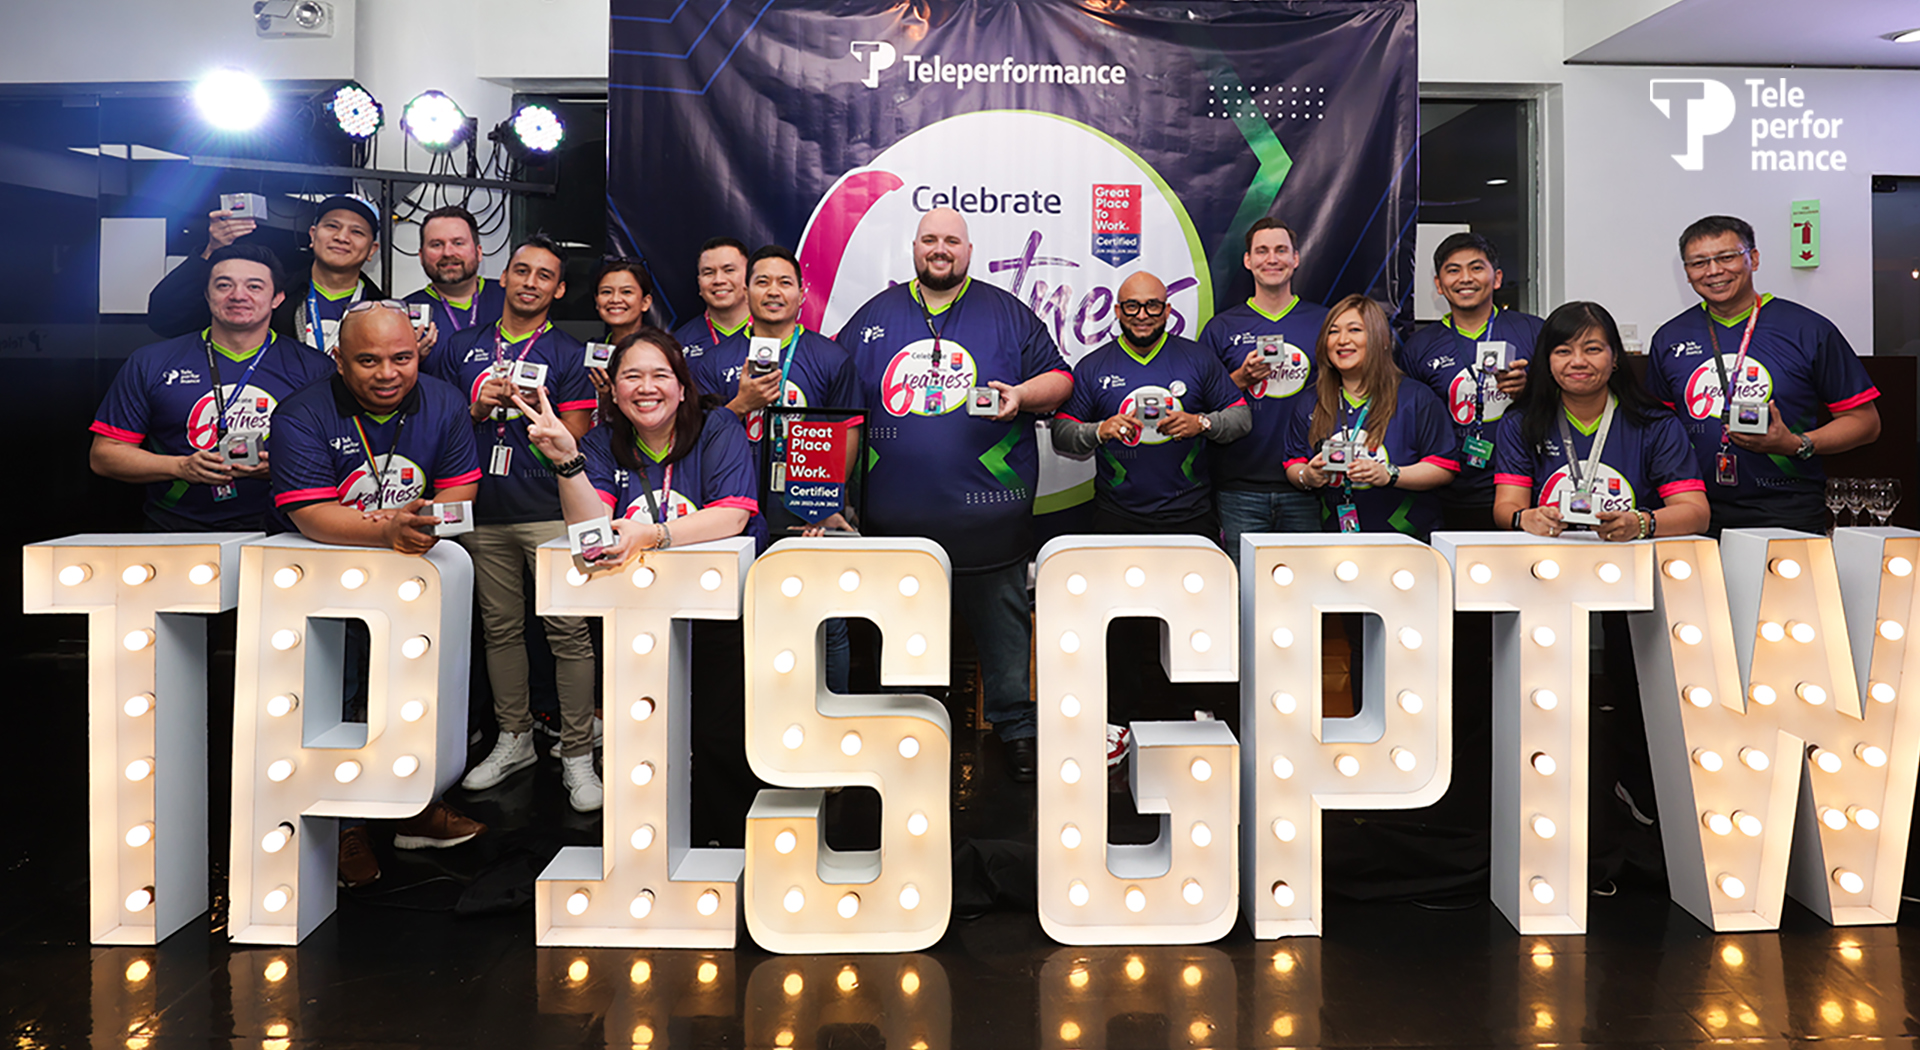 teleperformance in the philippines receives sixth consecutive great place to work award